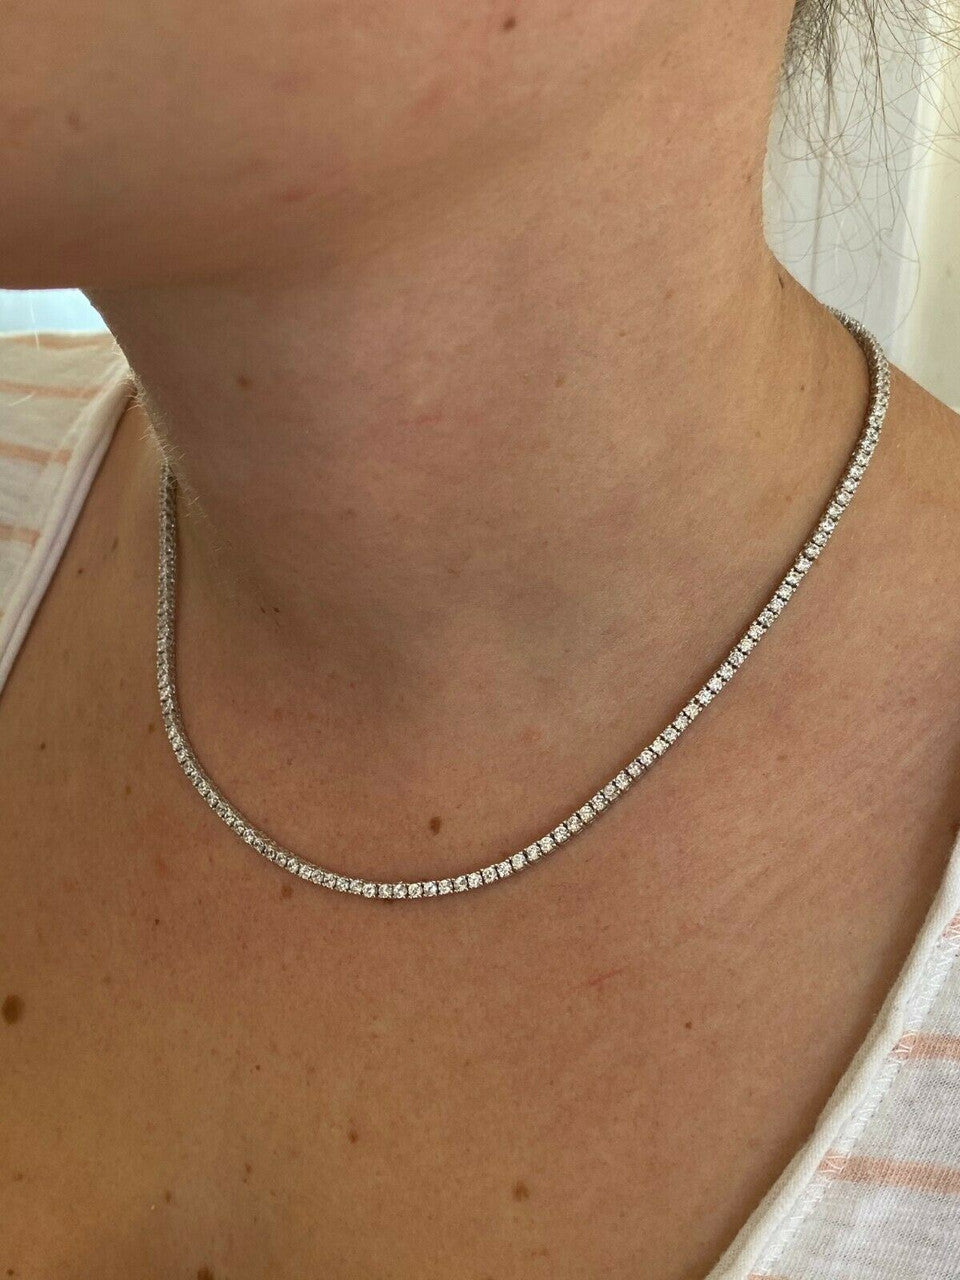 2mm White Gold Moissanite Diamond Micro Tennis Chain Necklace 925 Sterling Silver Chain